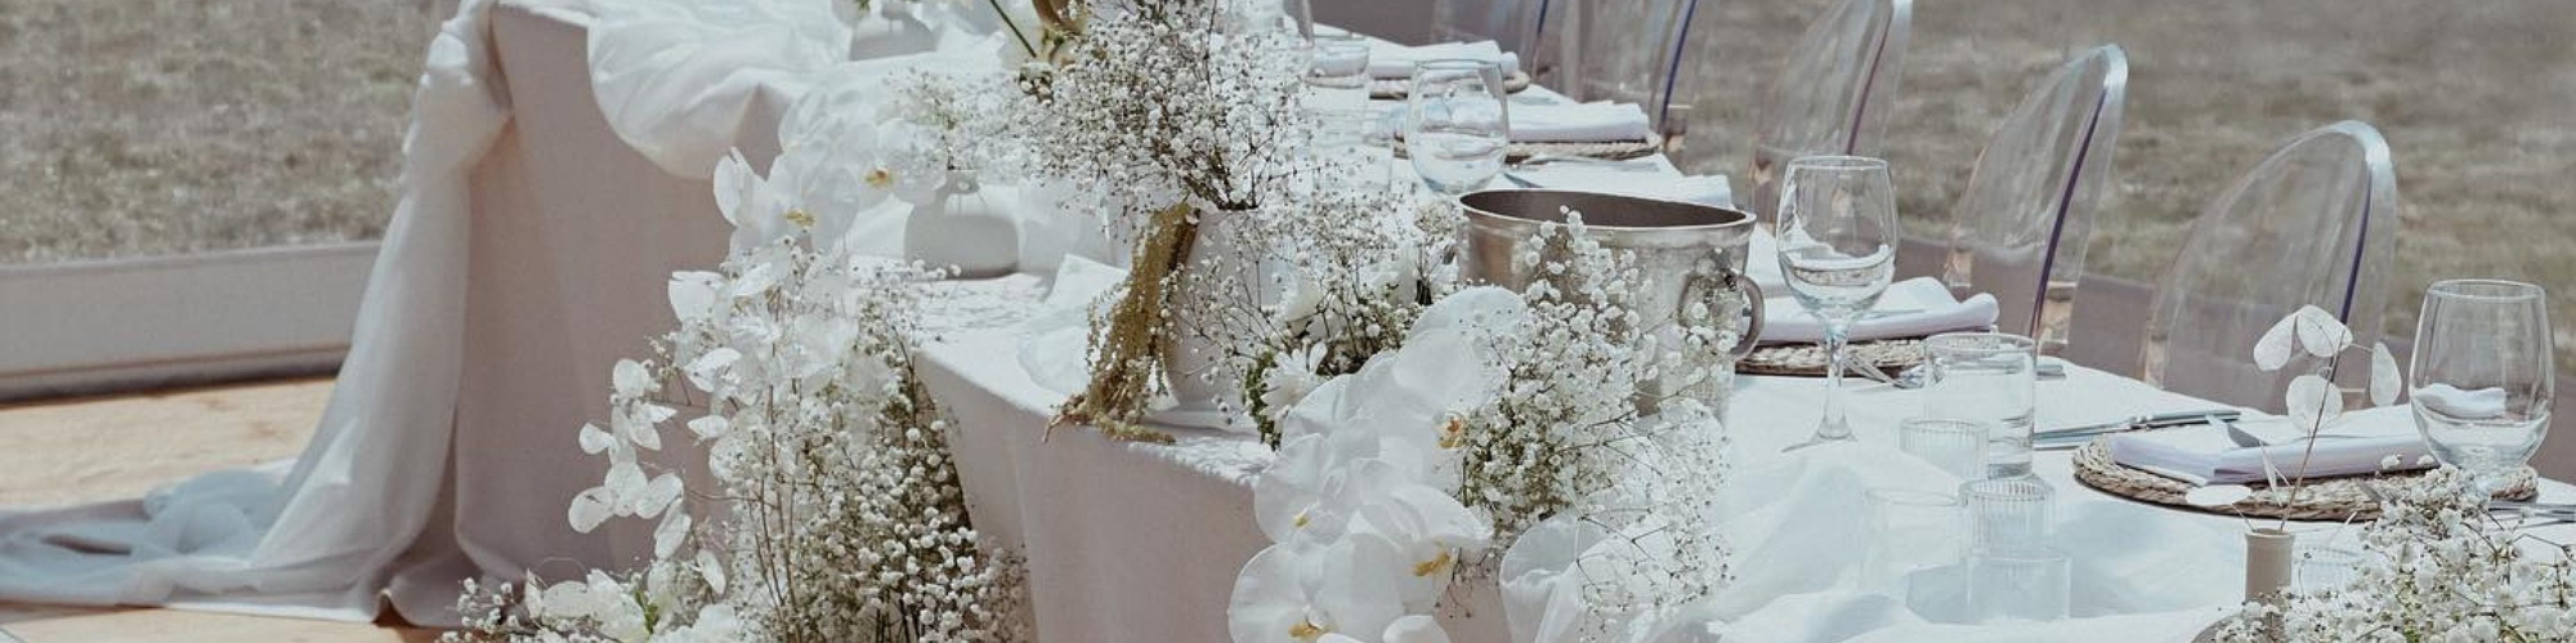 aisle profile banner judah rose wedding florals to the aisle wedding directory melbourne